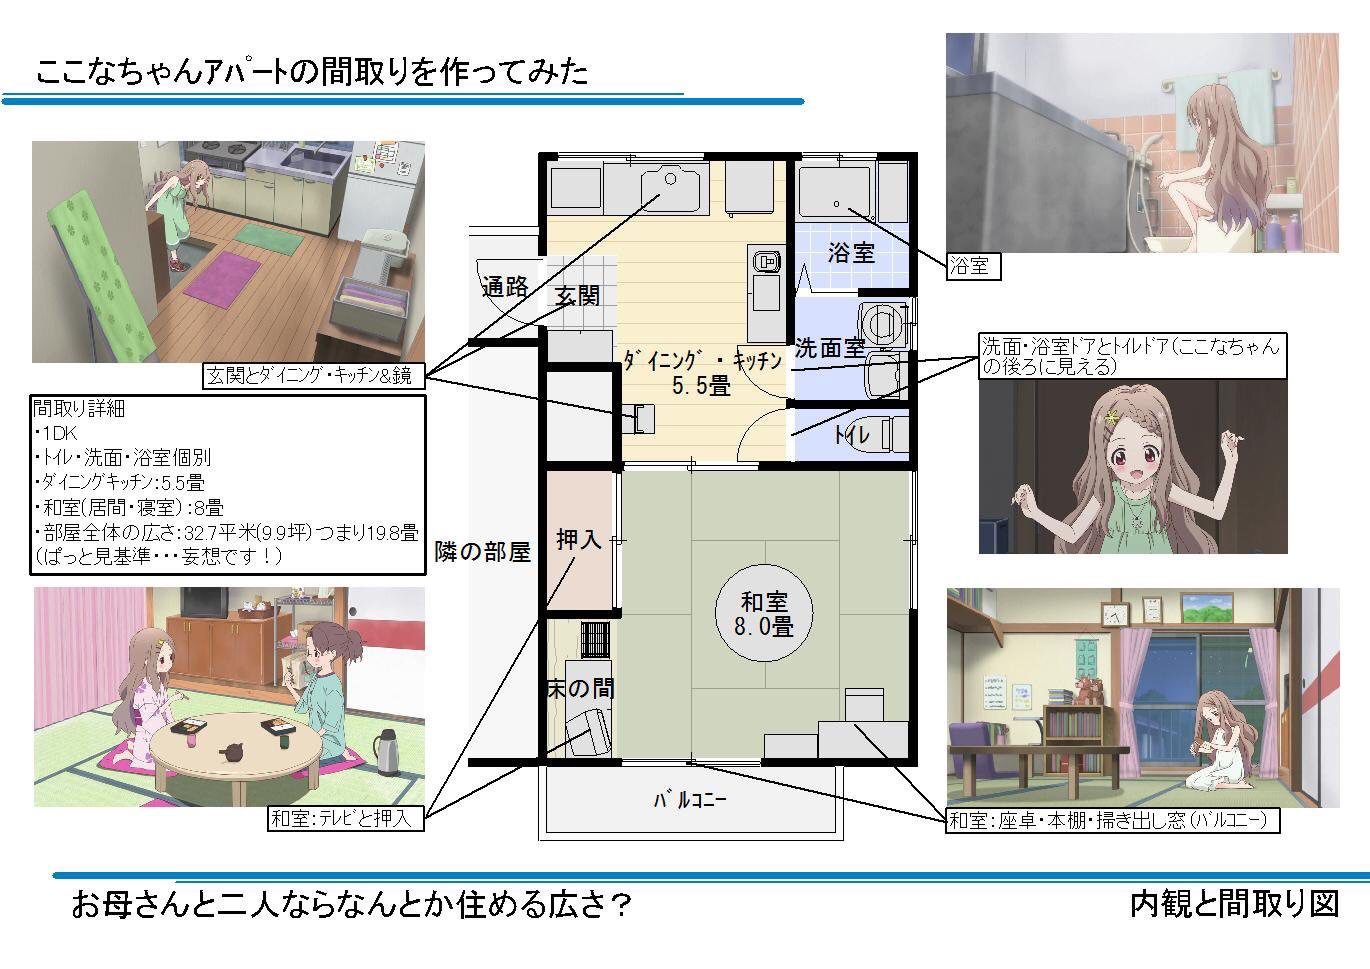 Why are the Susume not playing at her house here????? 3